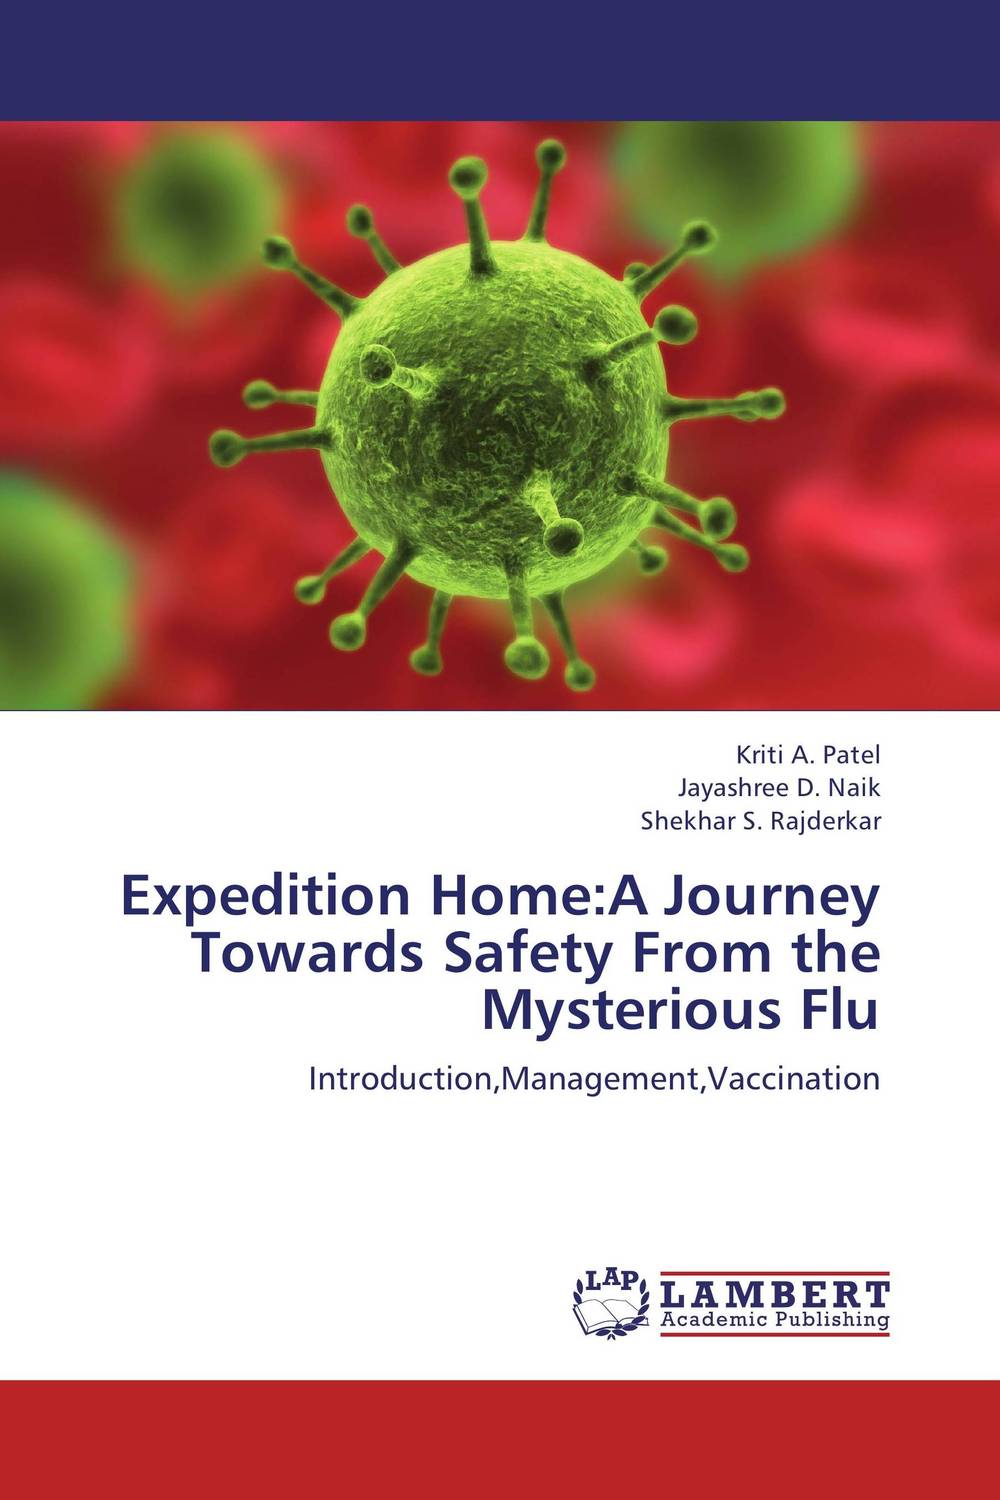 Expedition Home:A Journey Towards Safety From the Mysterious Flu